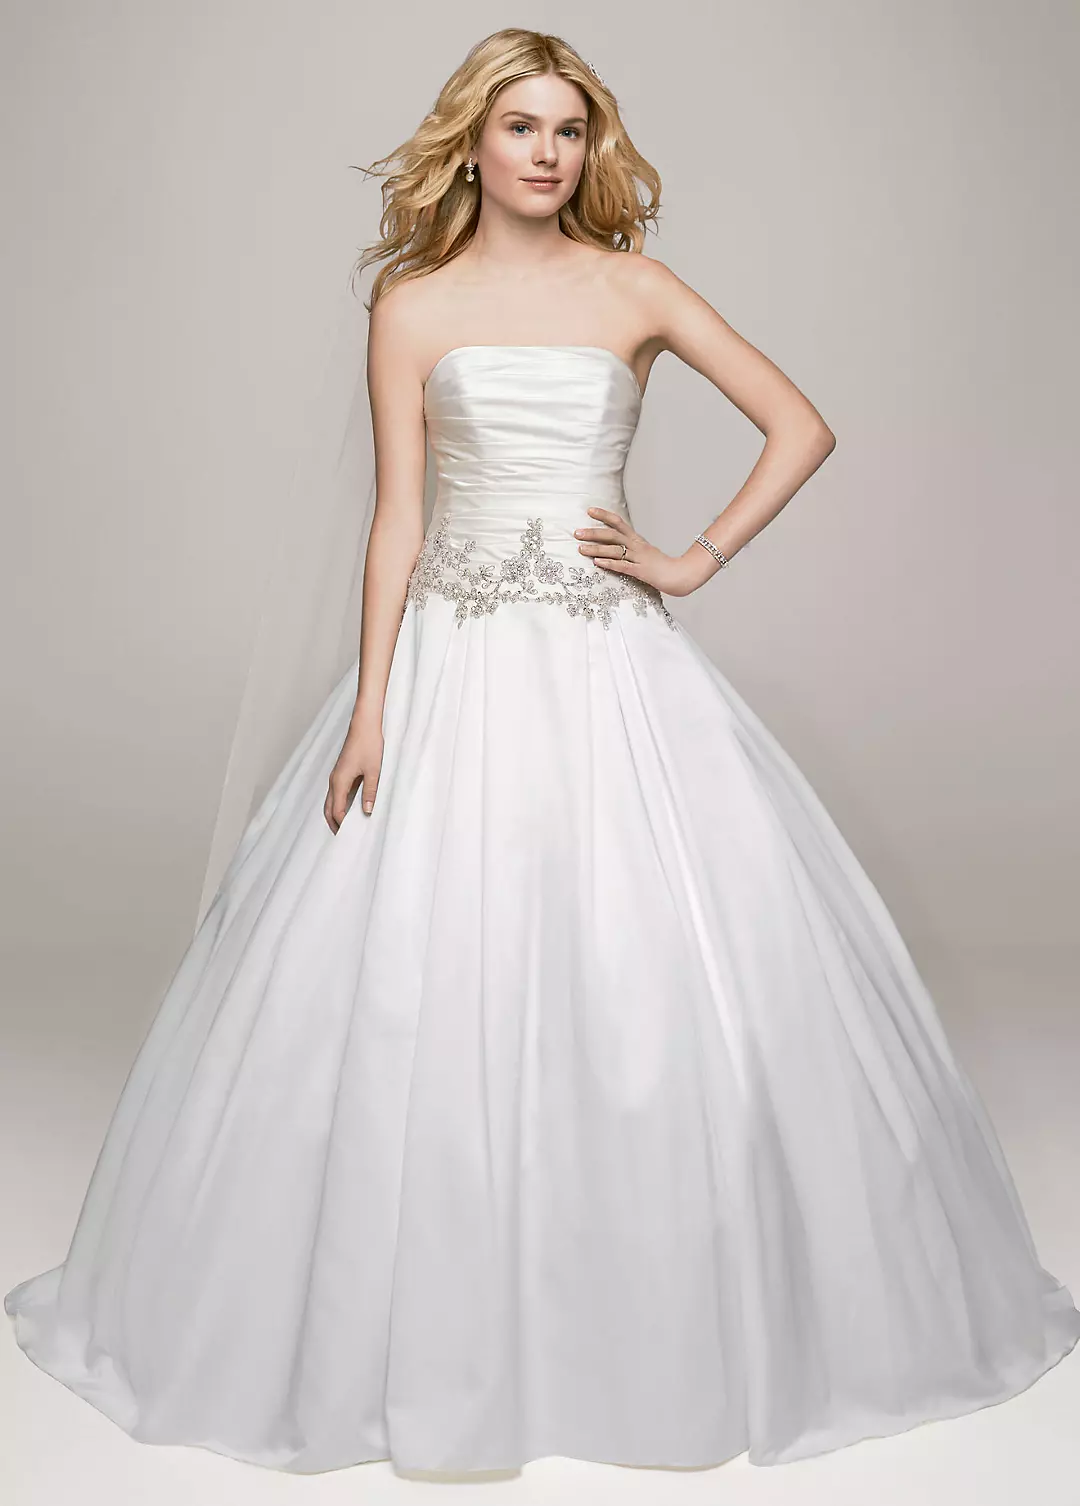 Strapless Satin Ball Gown with Beaded Accents Image